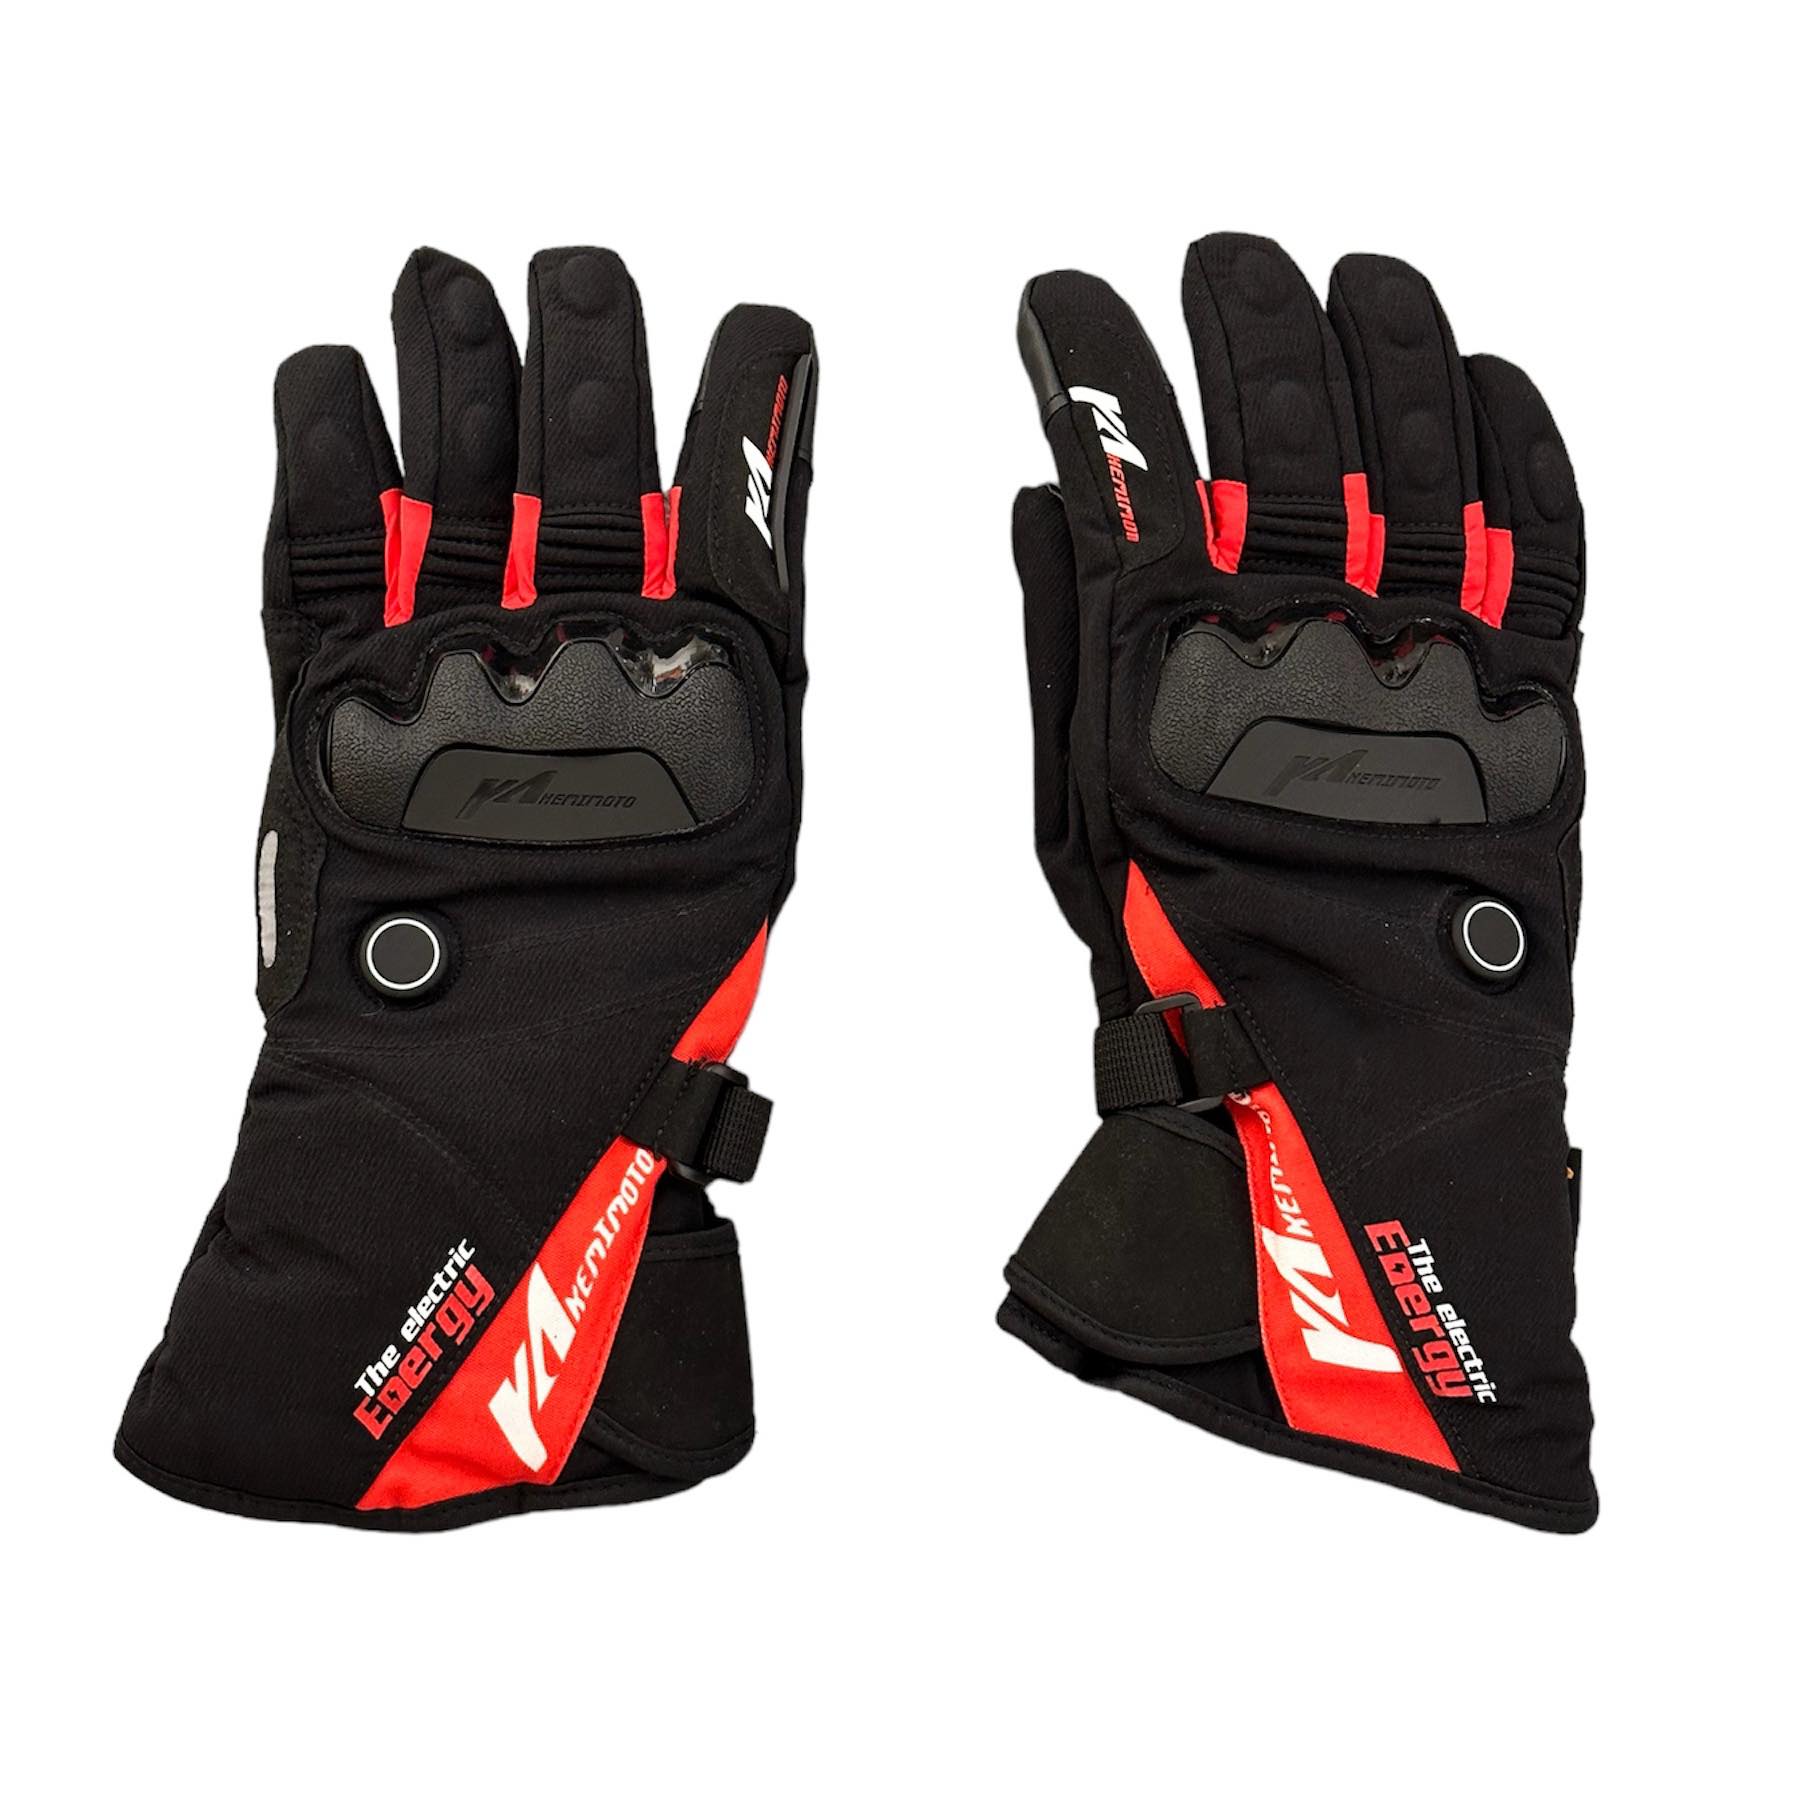 Heated Gloves Kemimoto, Perfect for driving in the cold